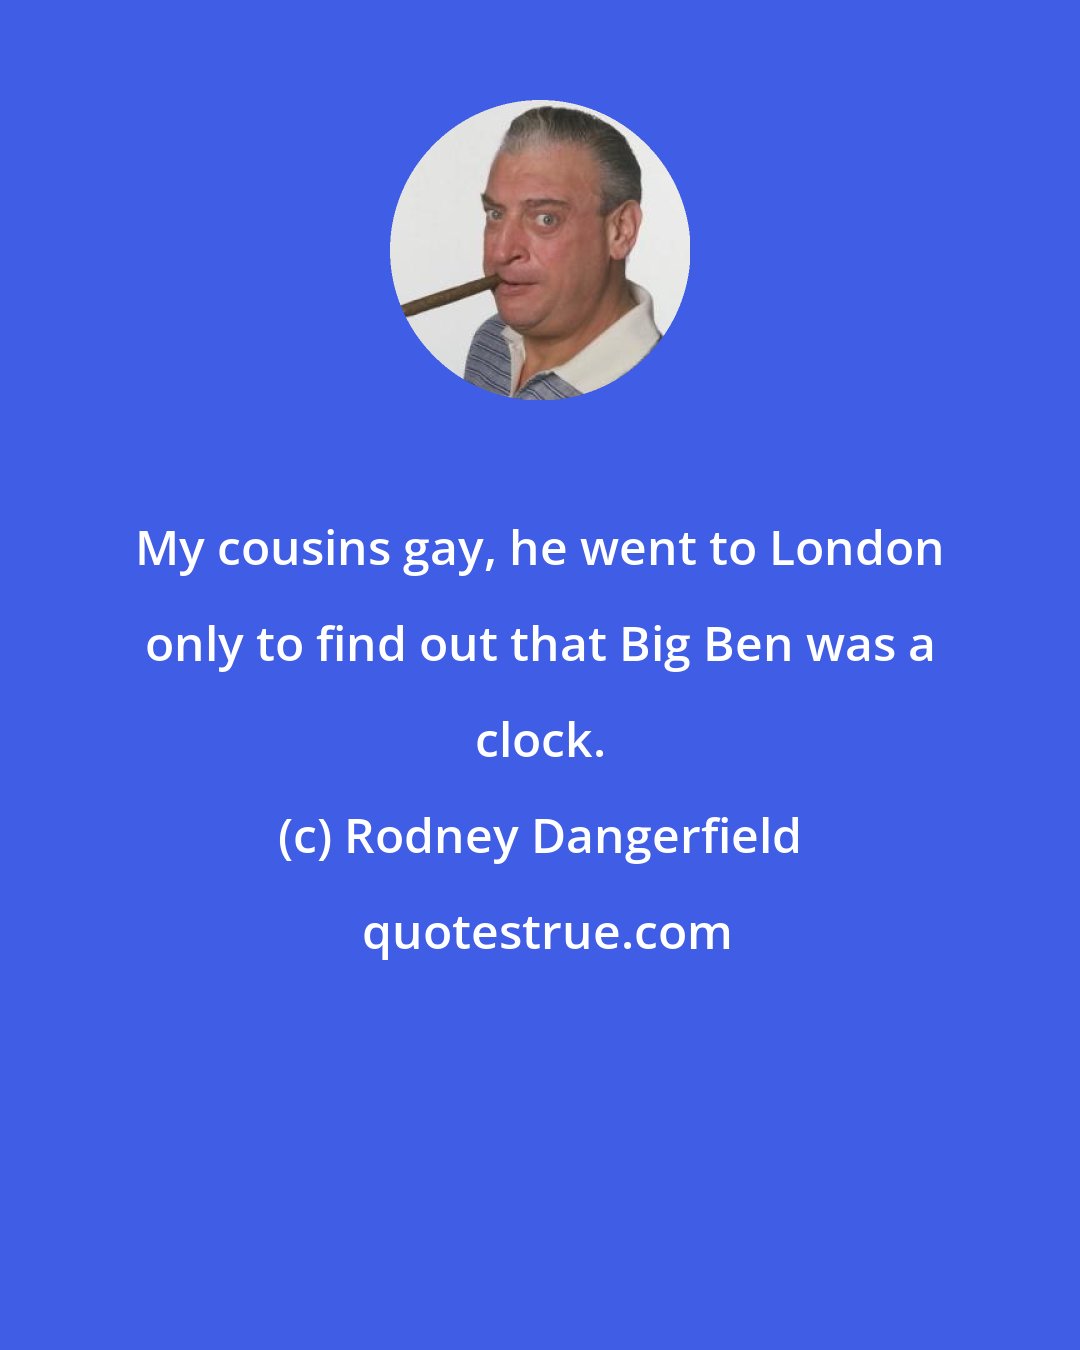 Rodney Dangerfield: My cousins gay, he went to London only to find out that Big Ben was a clock.